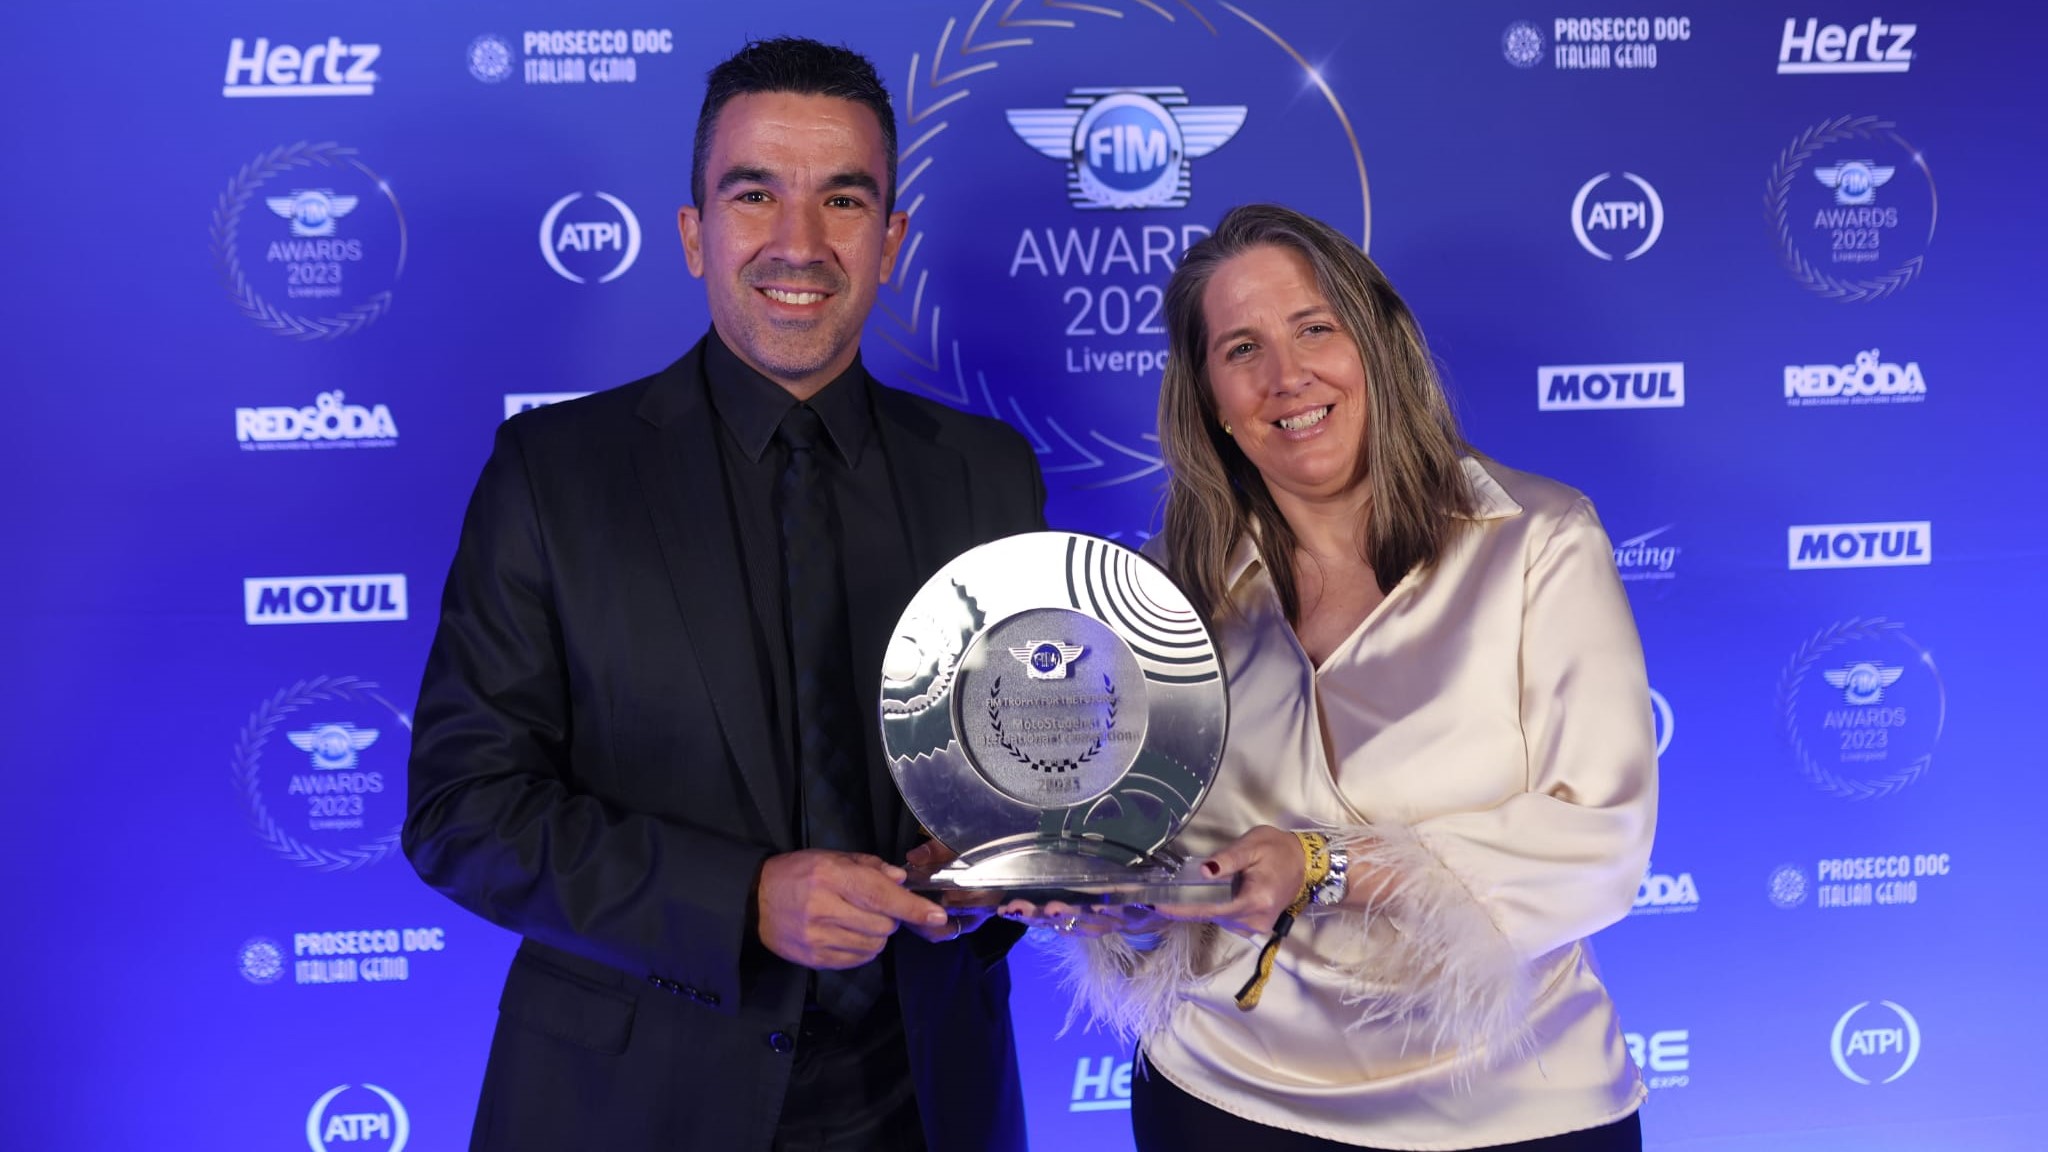 FIM - International Motorcycling Federation recognizes MotoStudent with its 